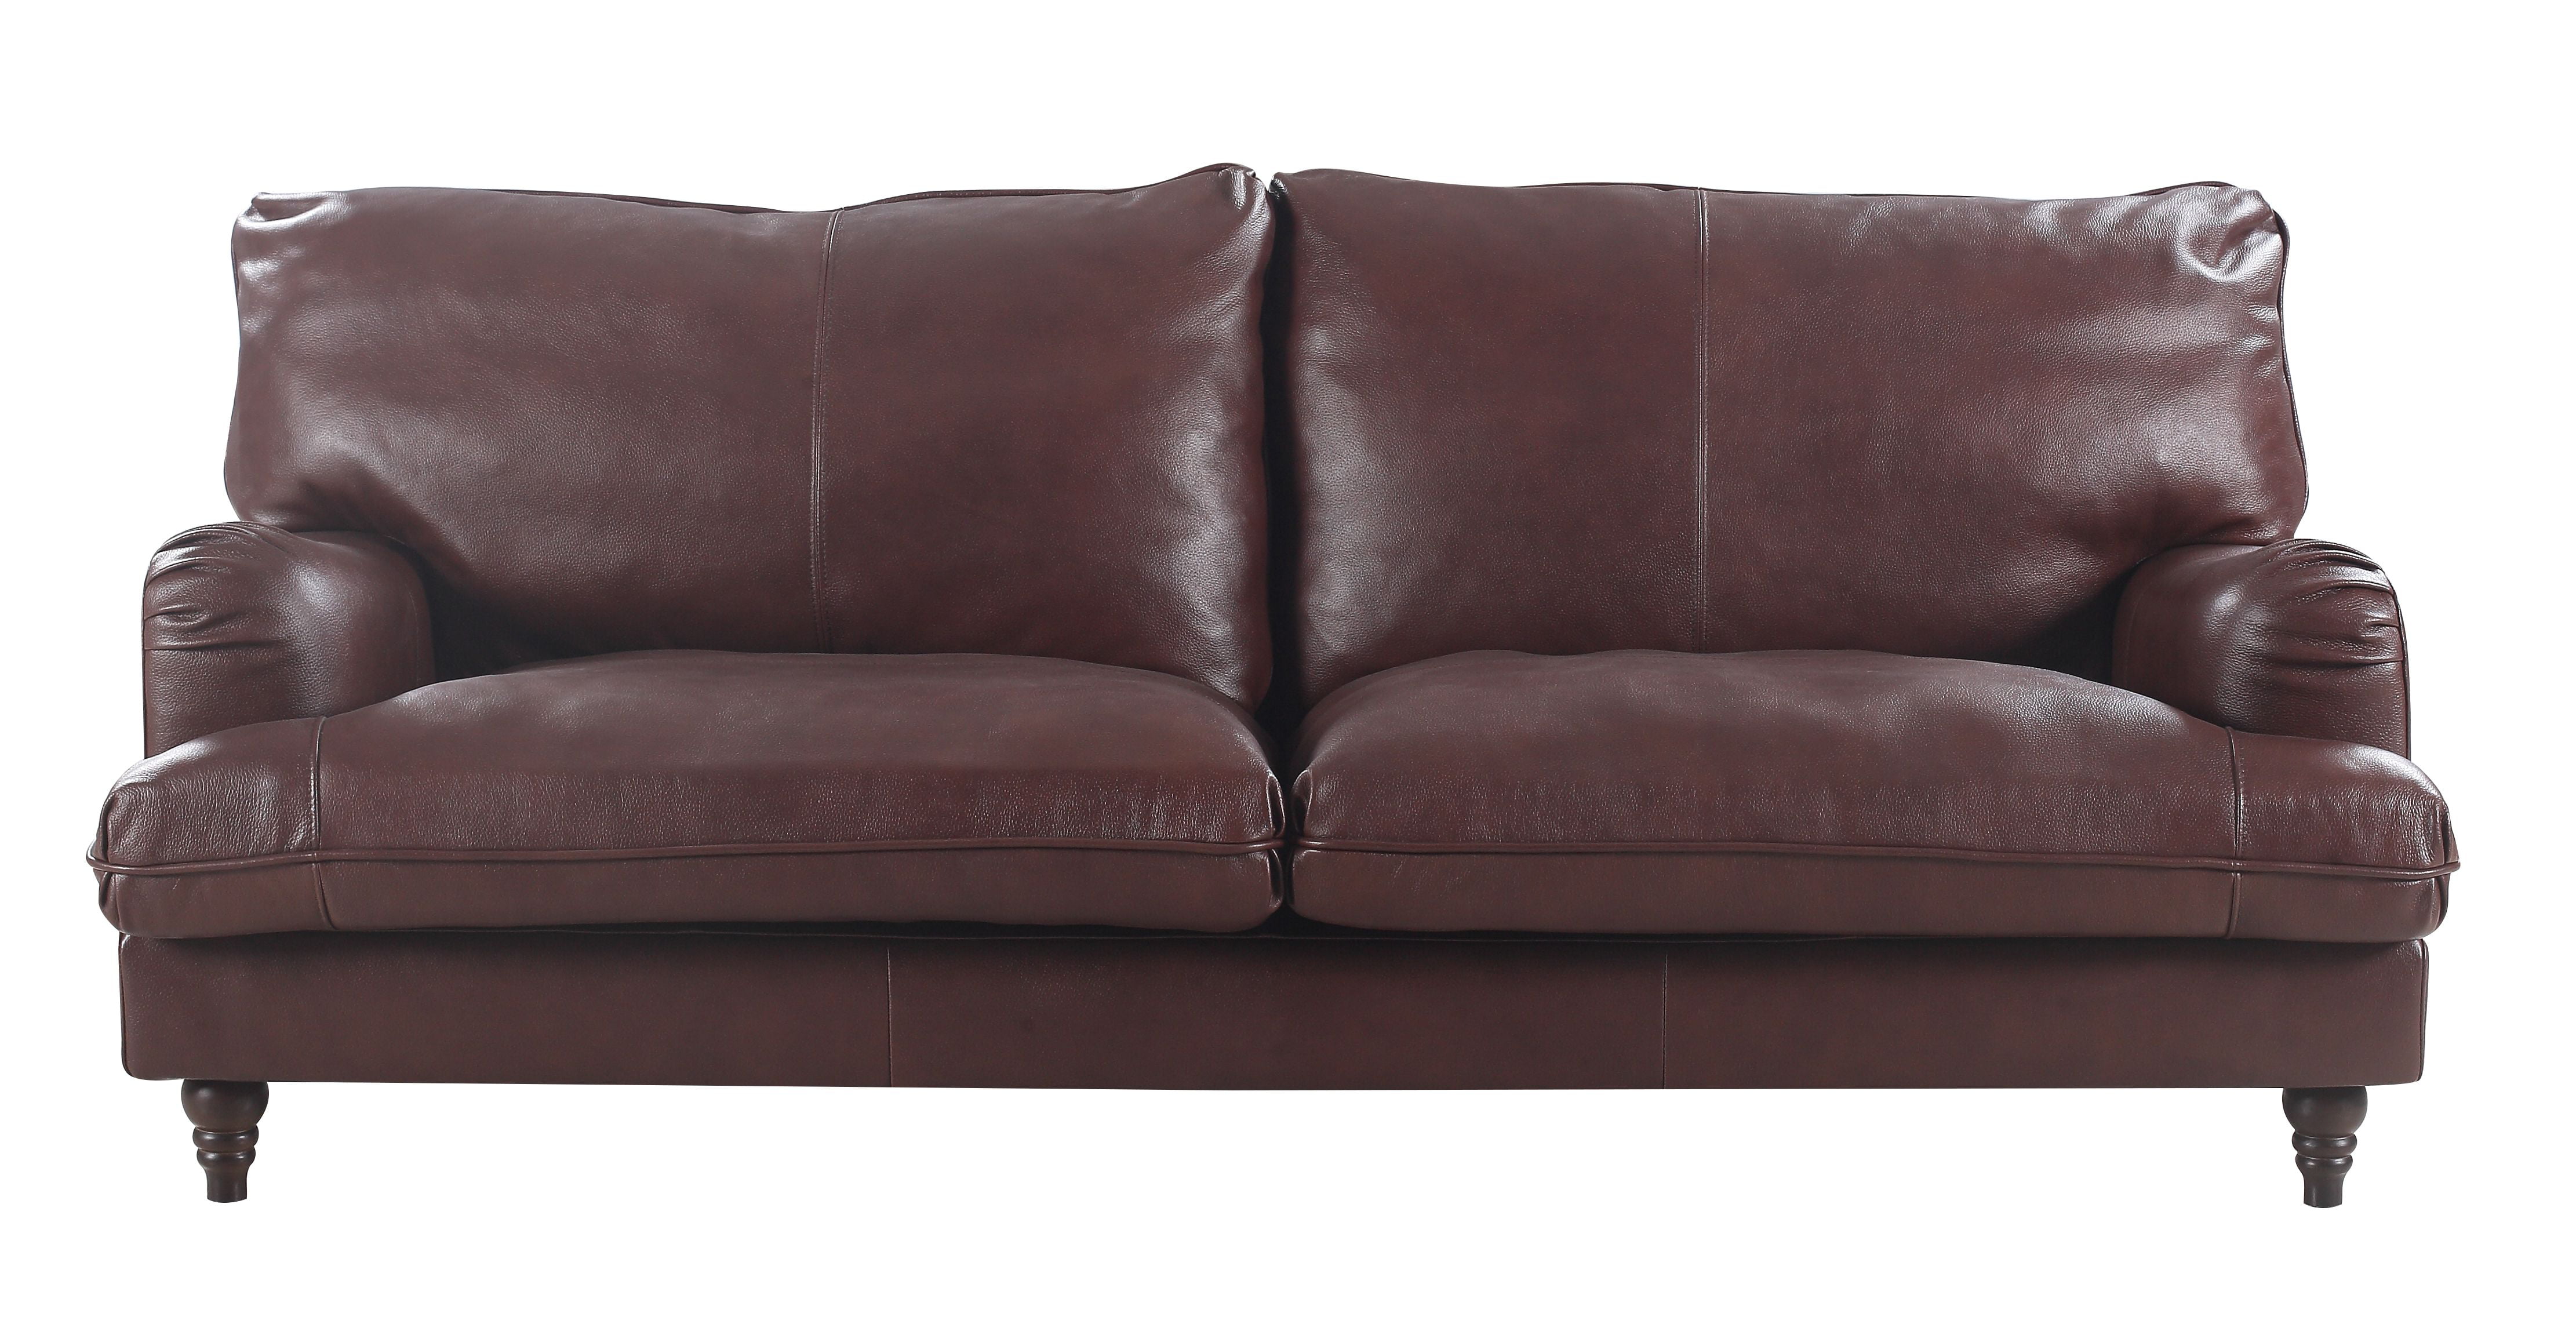 style brown leather sofa